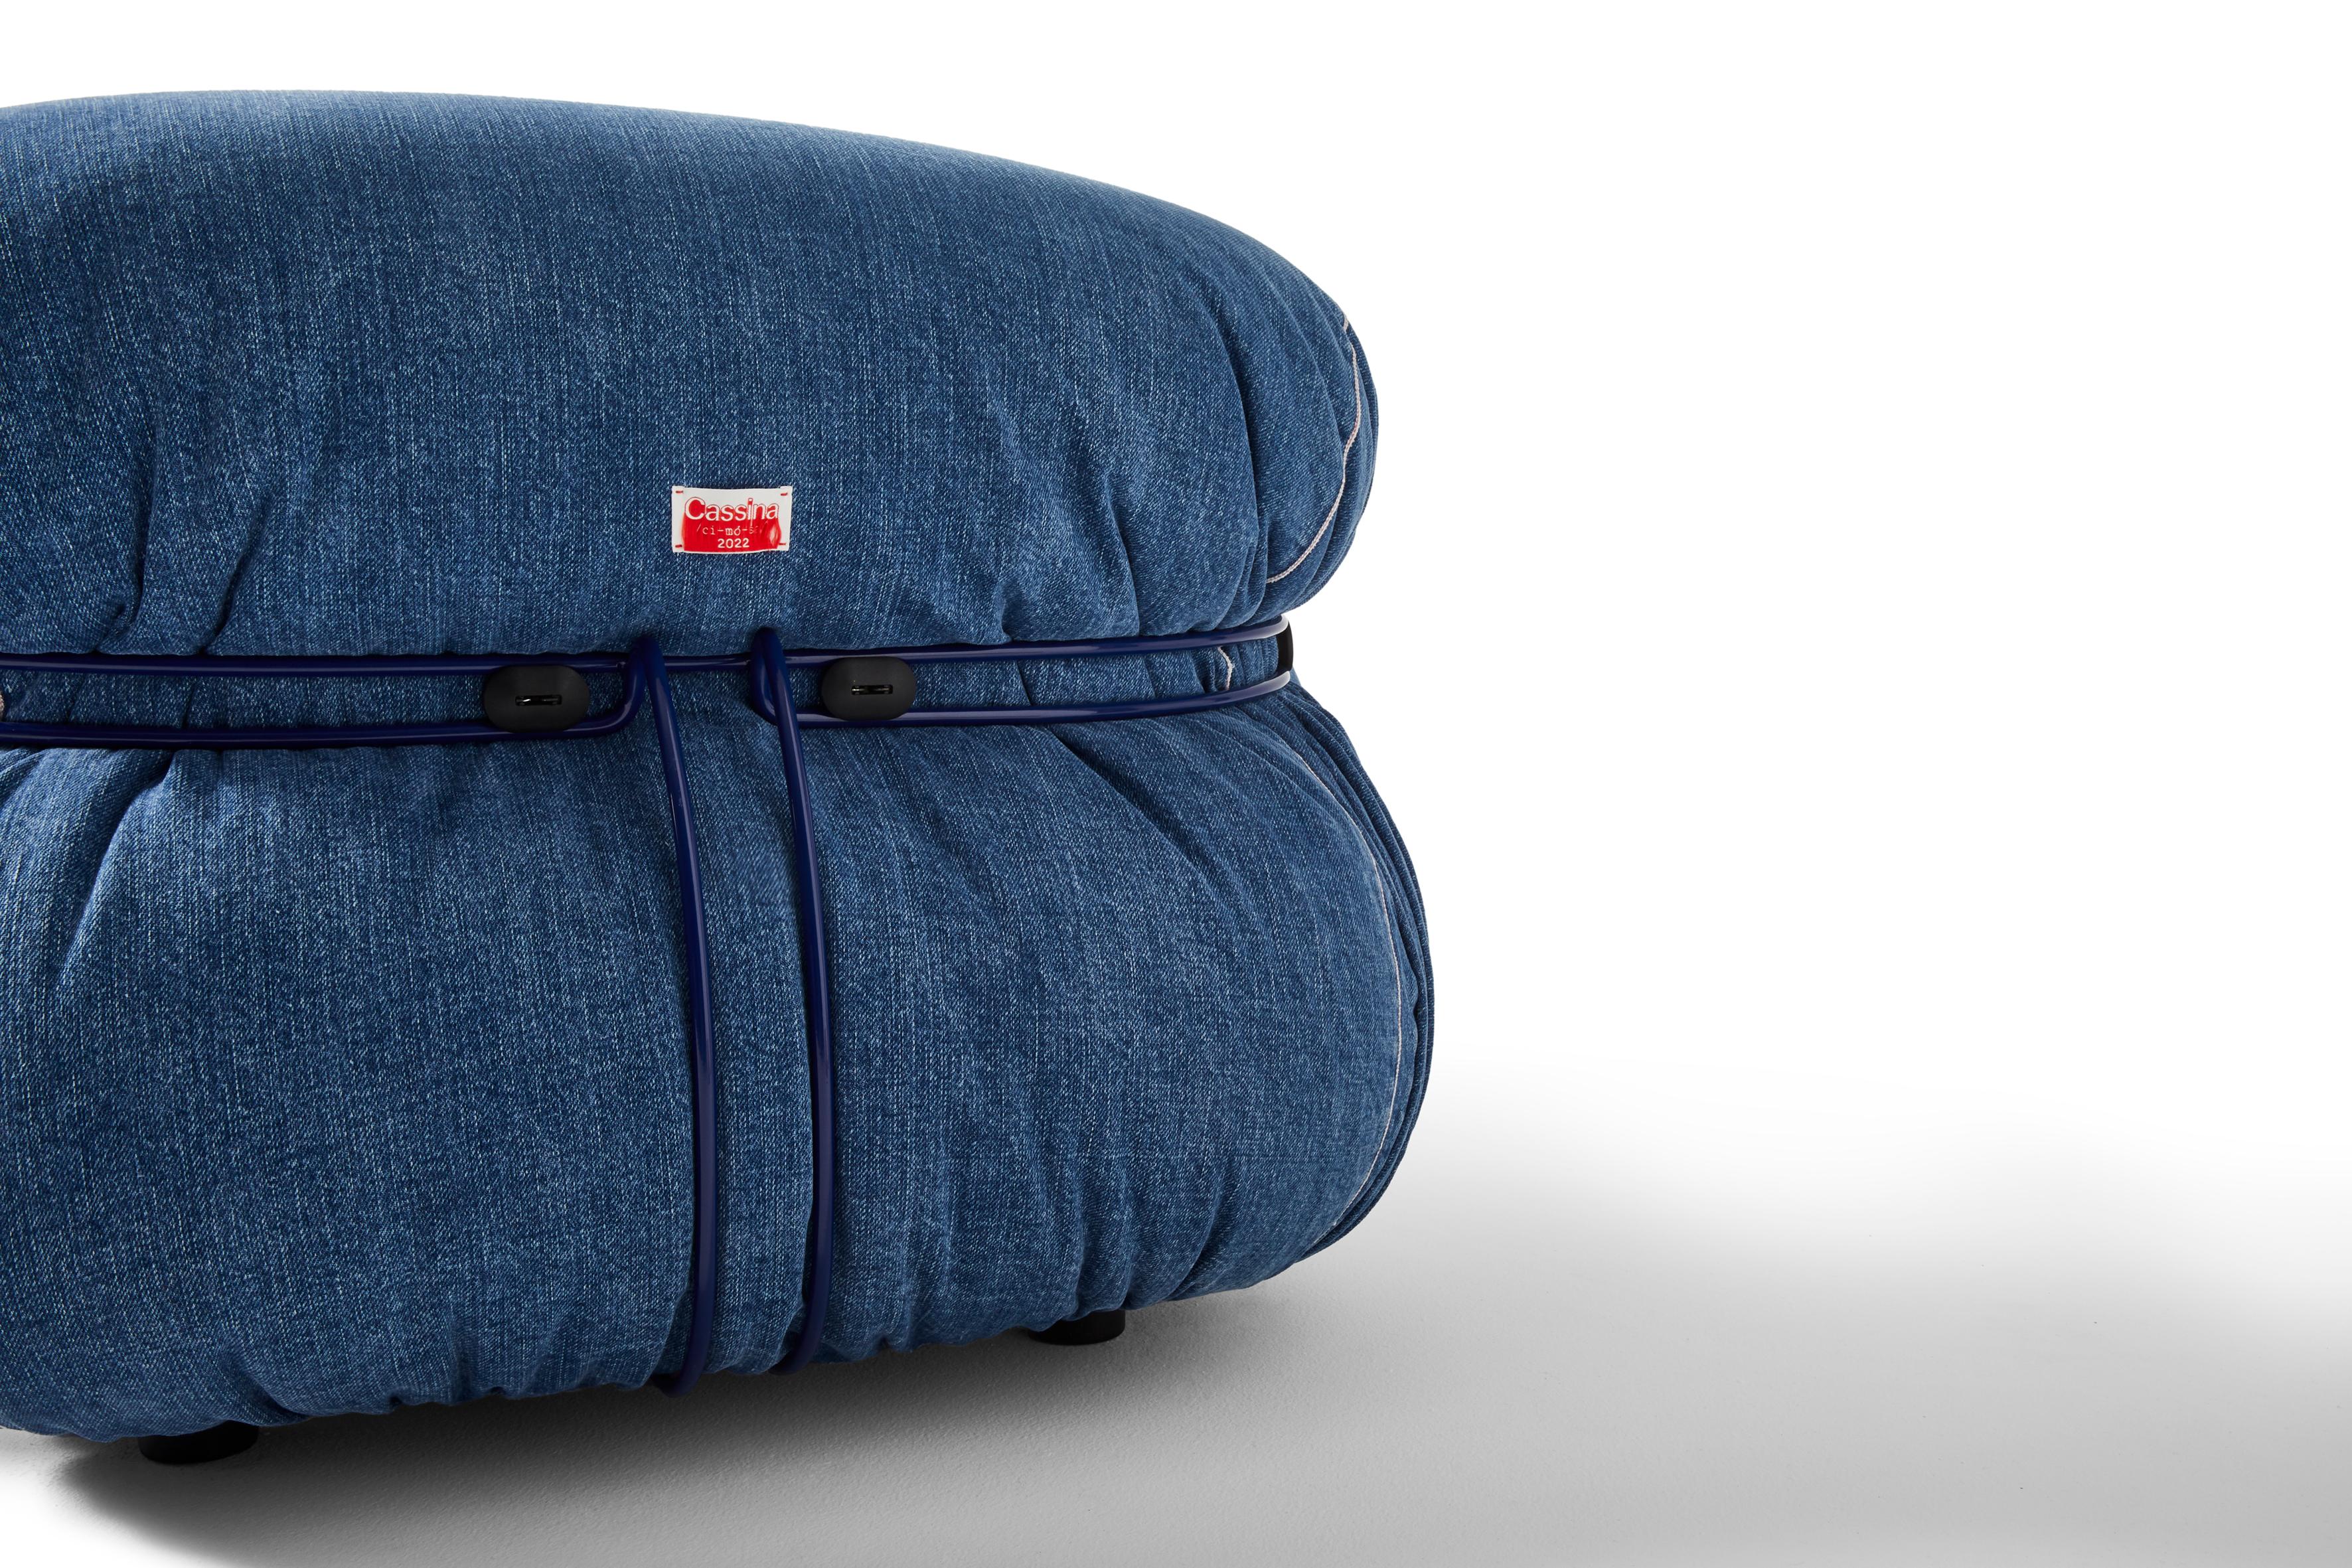 Contemporary Limited Edition Soriana Denim Armchair by Afra & Tobia Scarpa for Cassina For Sale